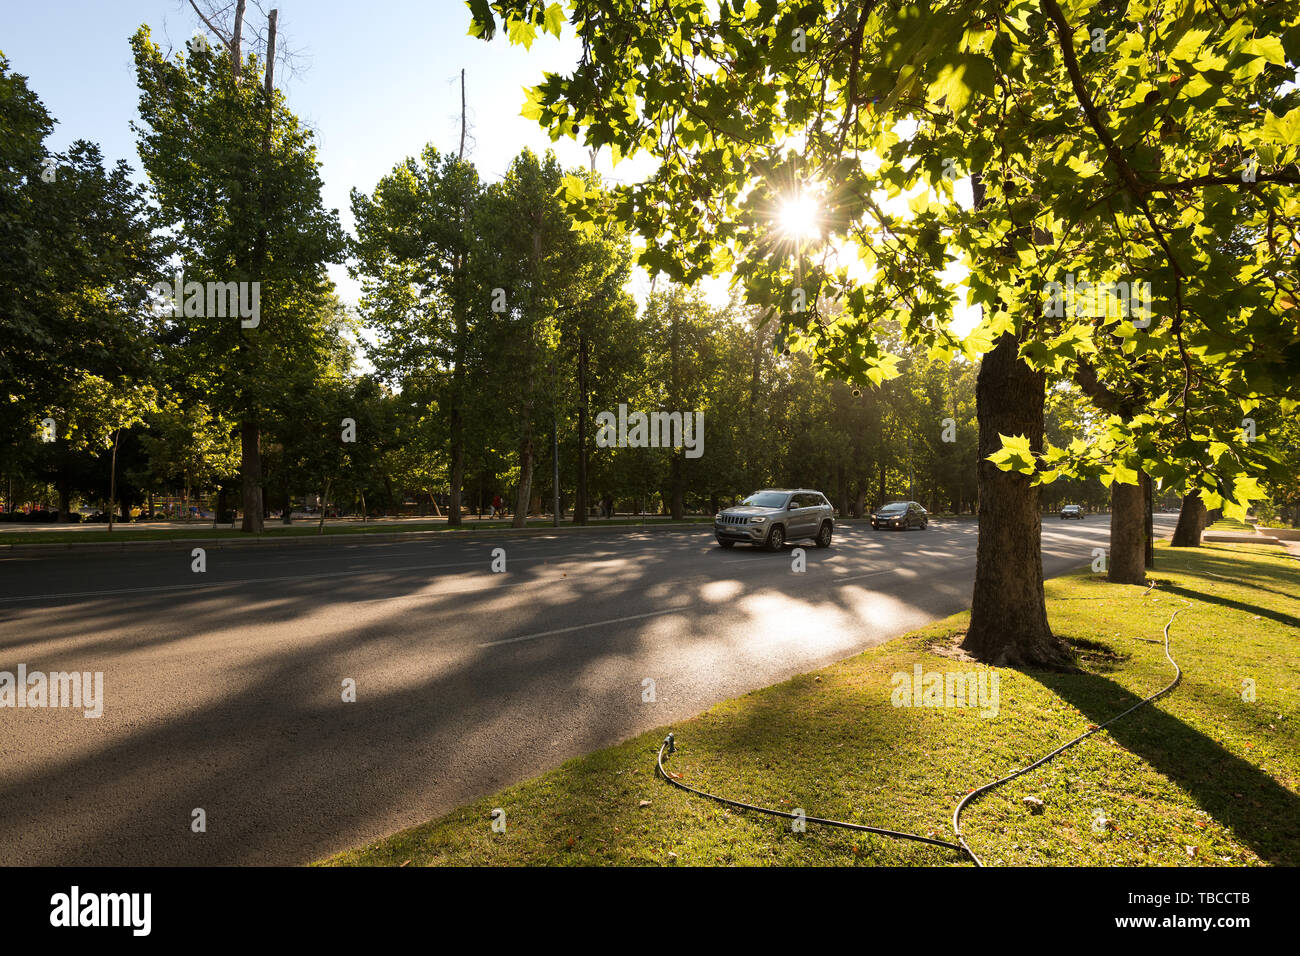 Santiago, Region Metropolitana, Chile - Traffic in the Forestal Park at downtown with a setting sun. Stock Photo